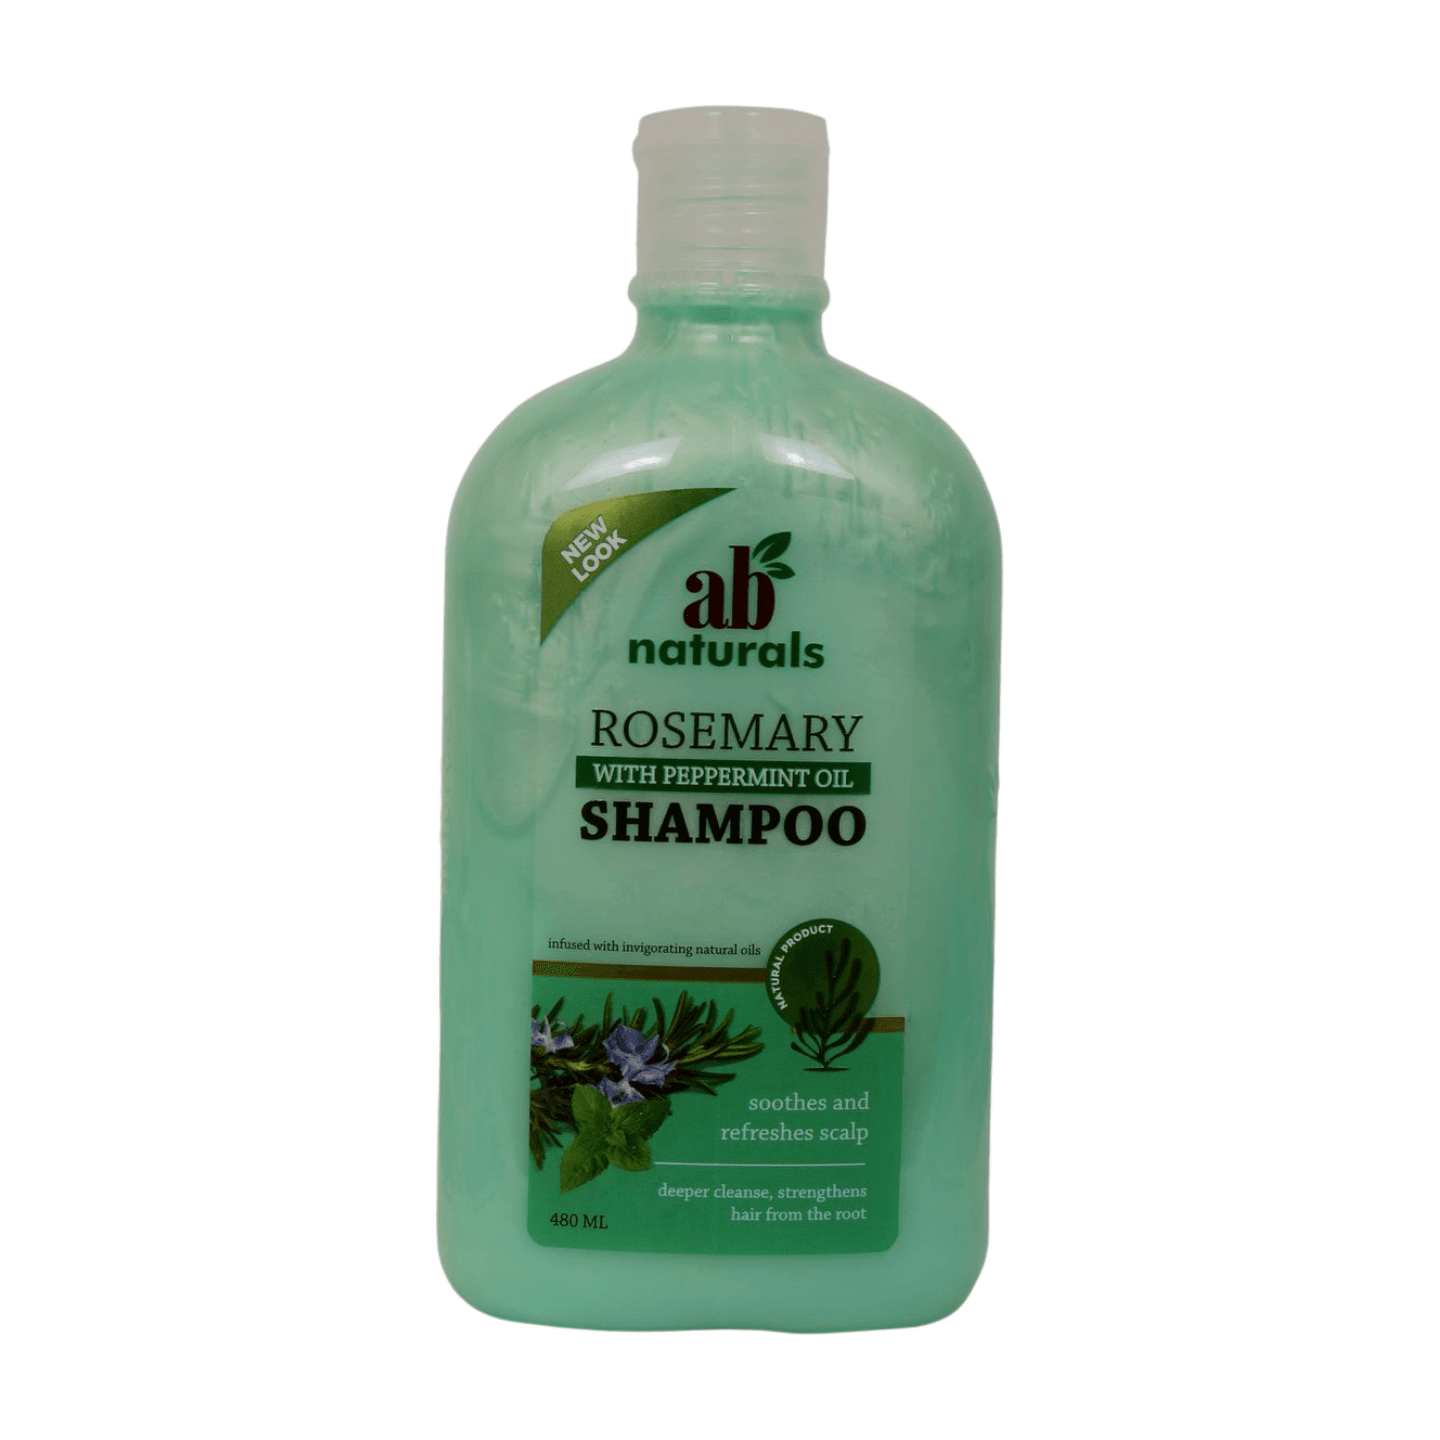 Ab Naturals Rosemary Shampoo 480ml - African Beauty Online